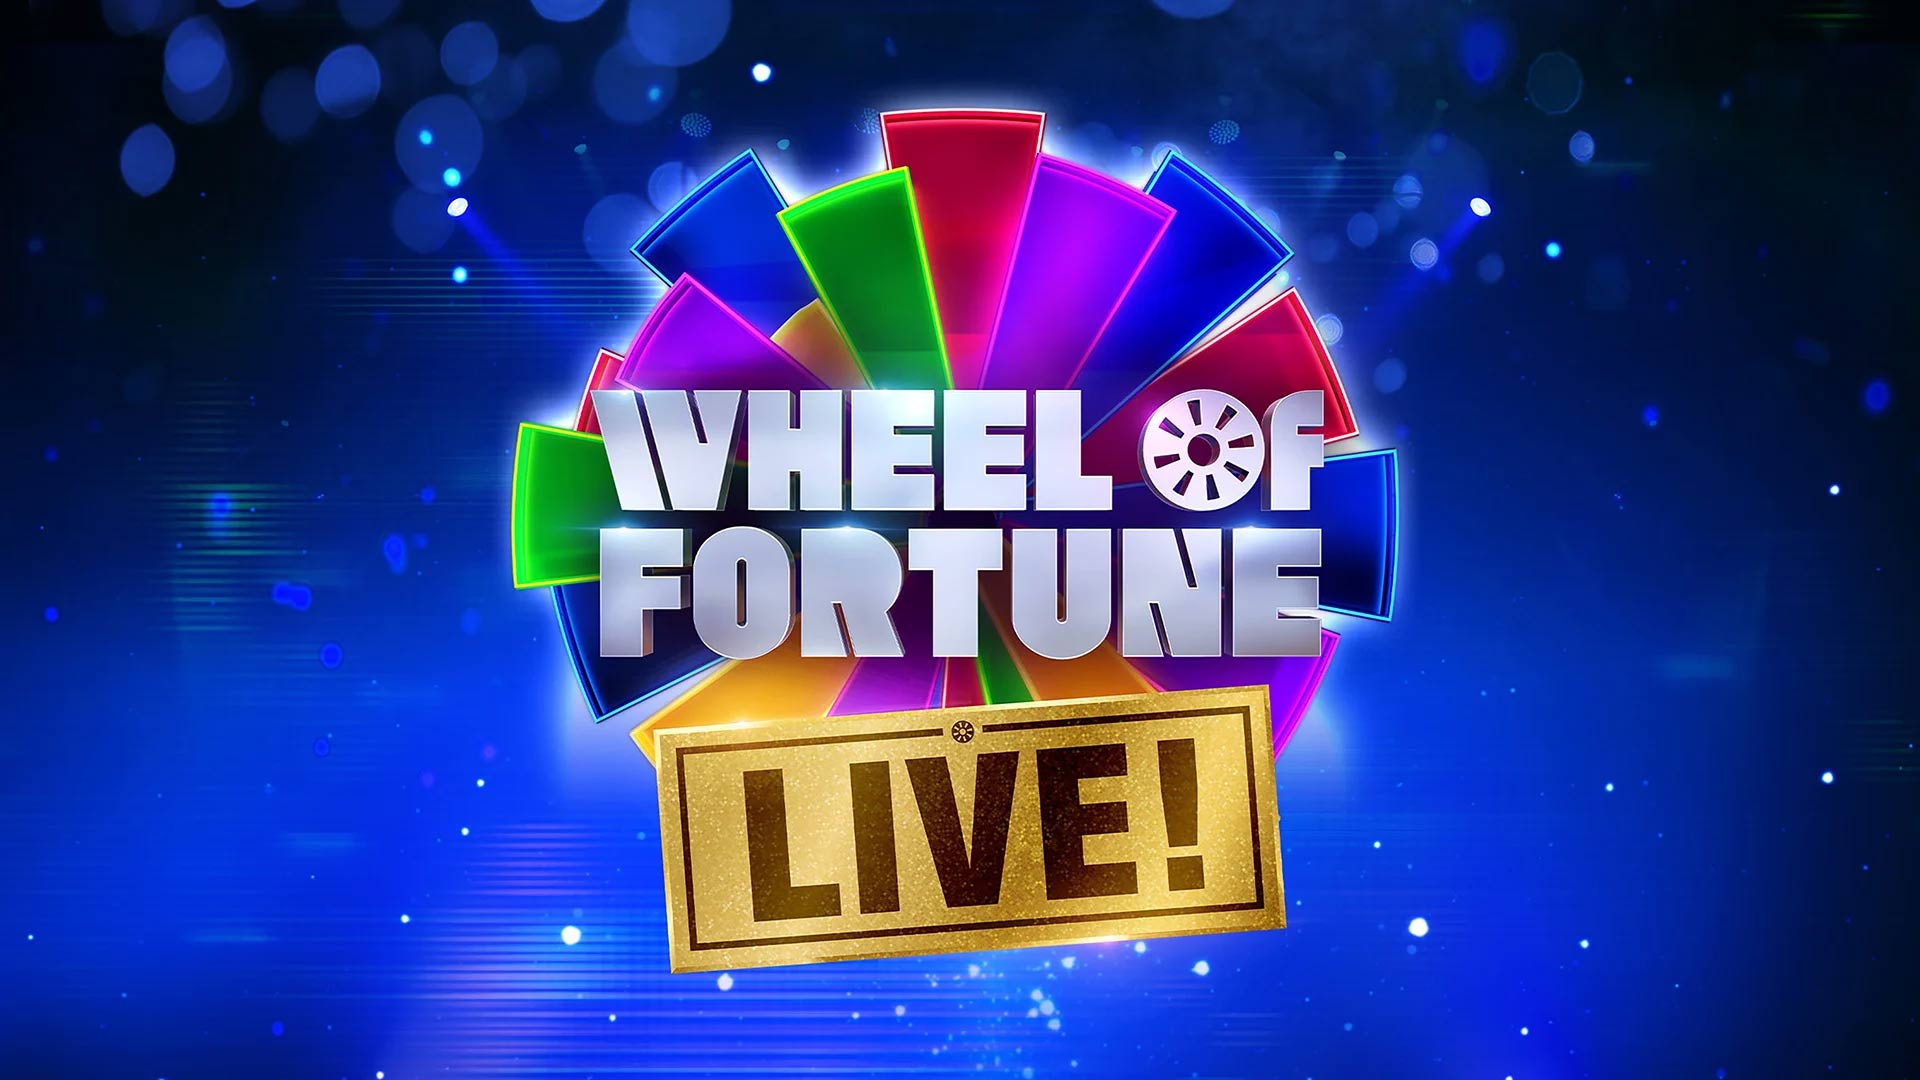 Wheel of Fortune LIVE! | American Bank Center